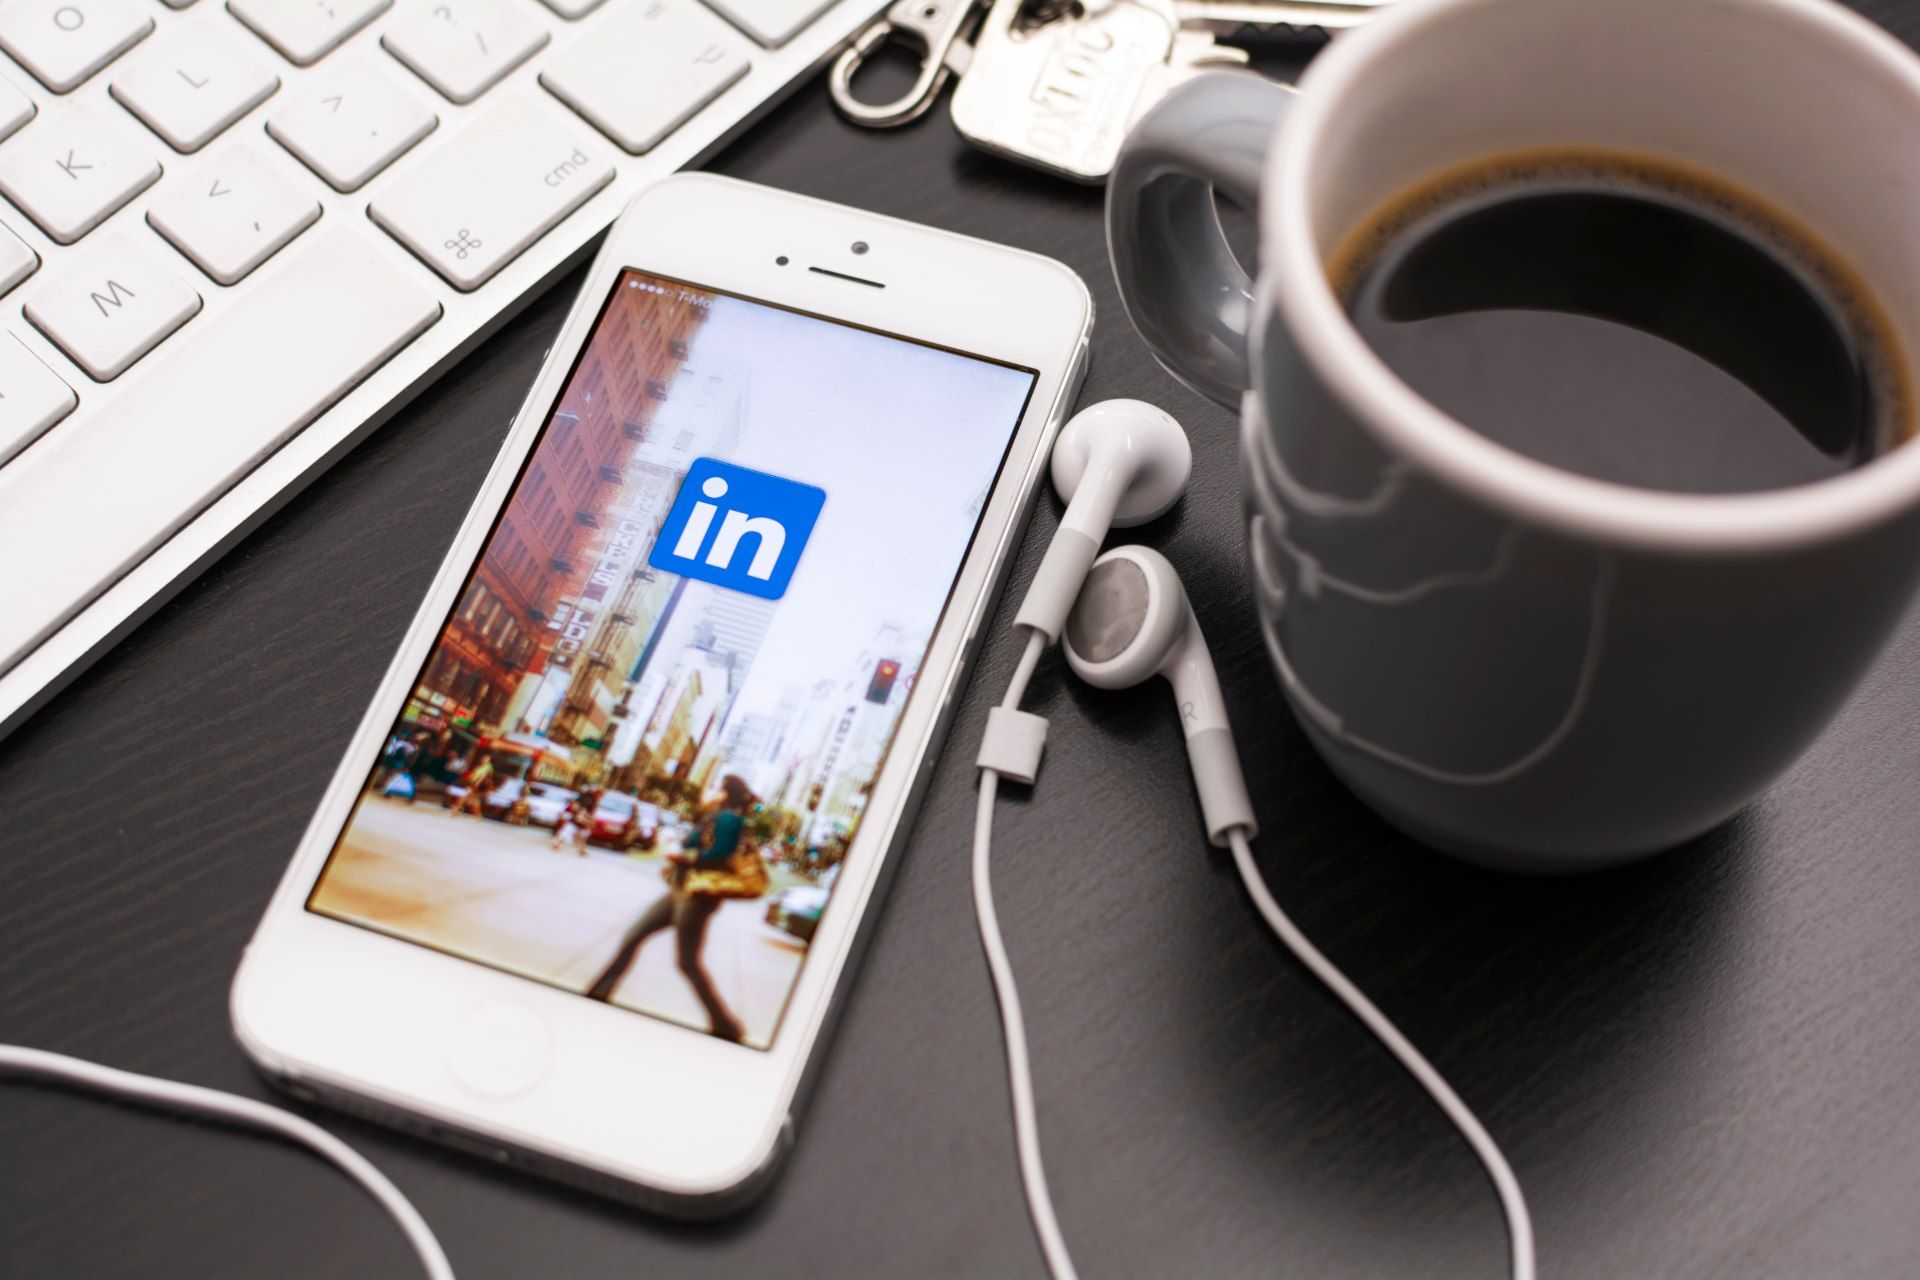 An iPhone displays the LinkedIn app while lying next to coffee mug, keyboard and earbuds